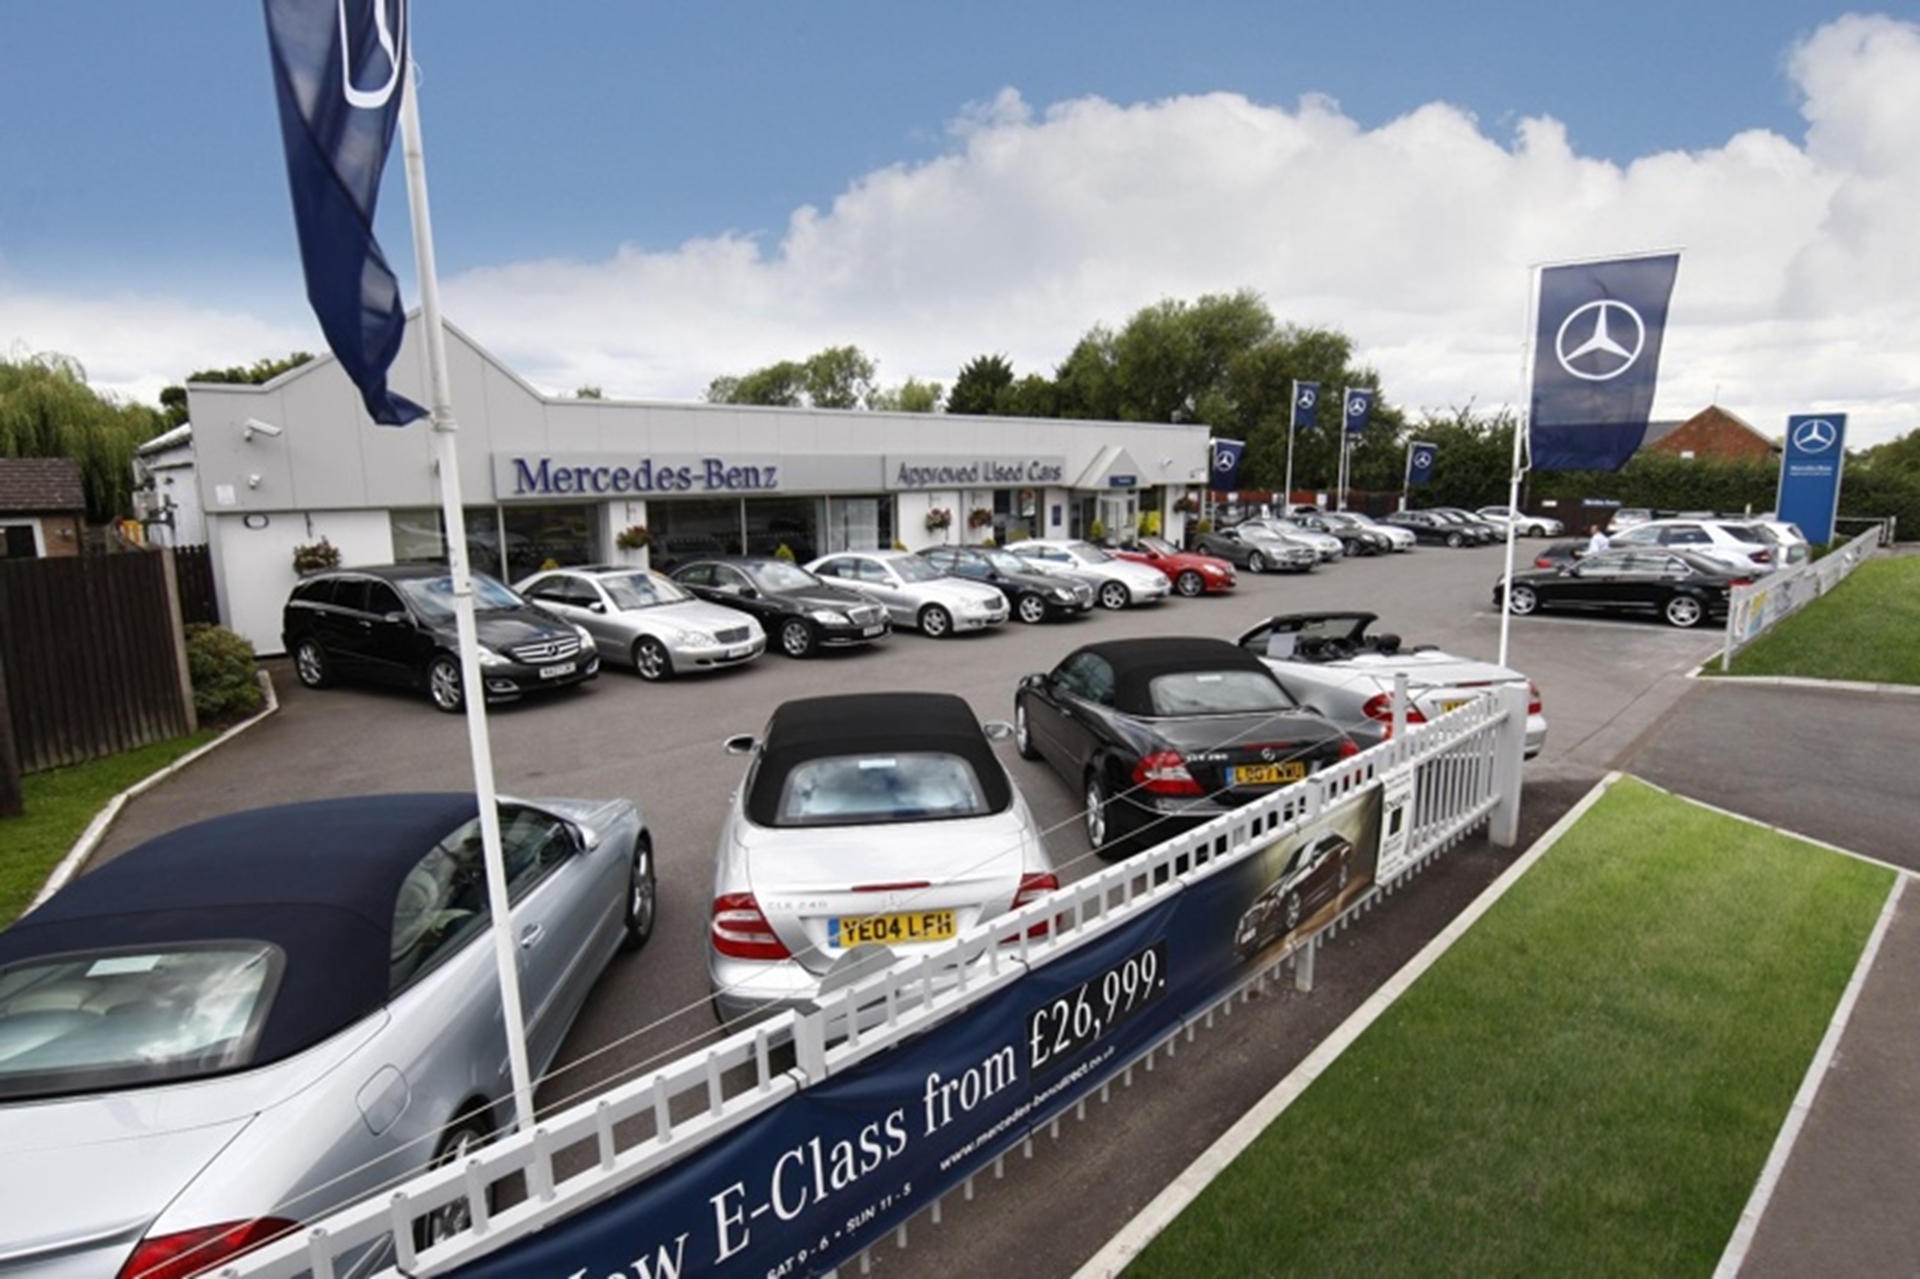 Mercedes-Benz UK Invests In Retailer Drive to Promote Approved Used Benefits